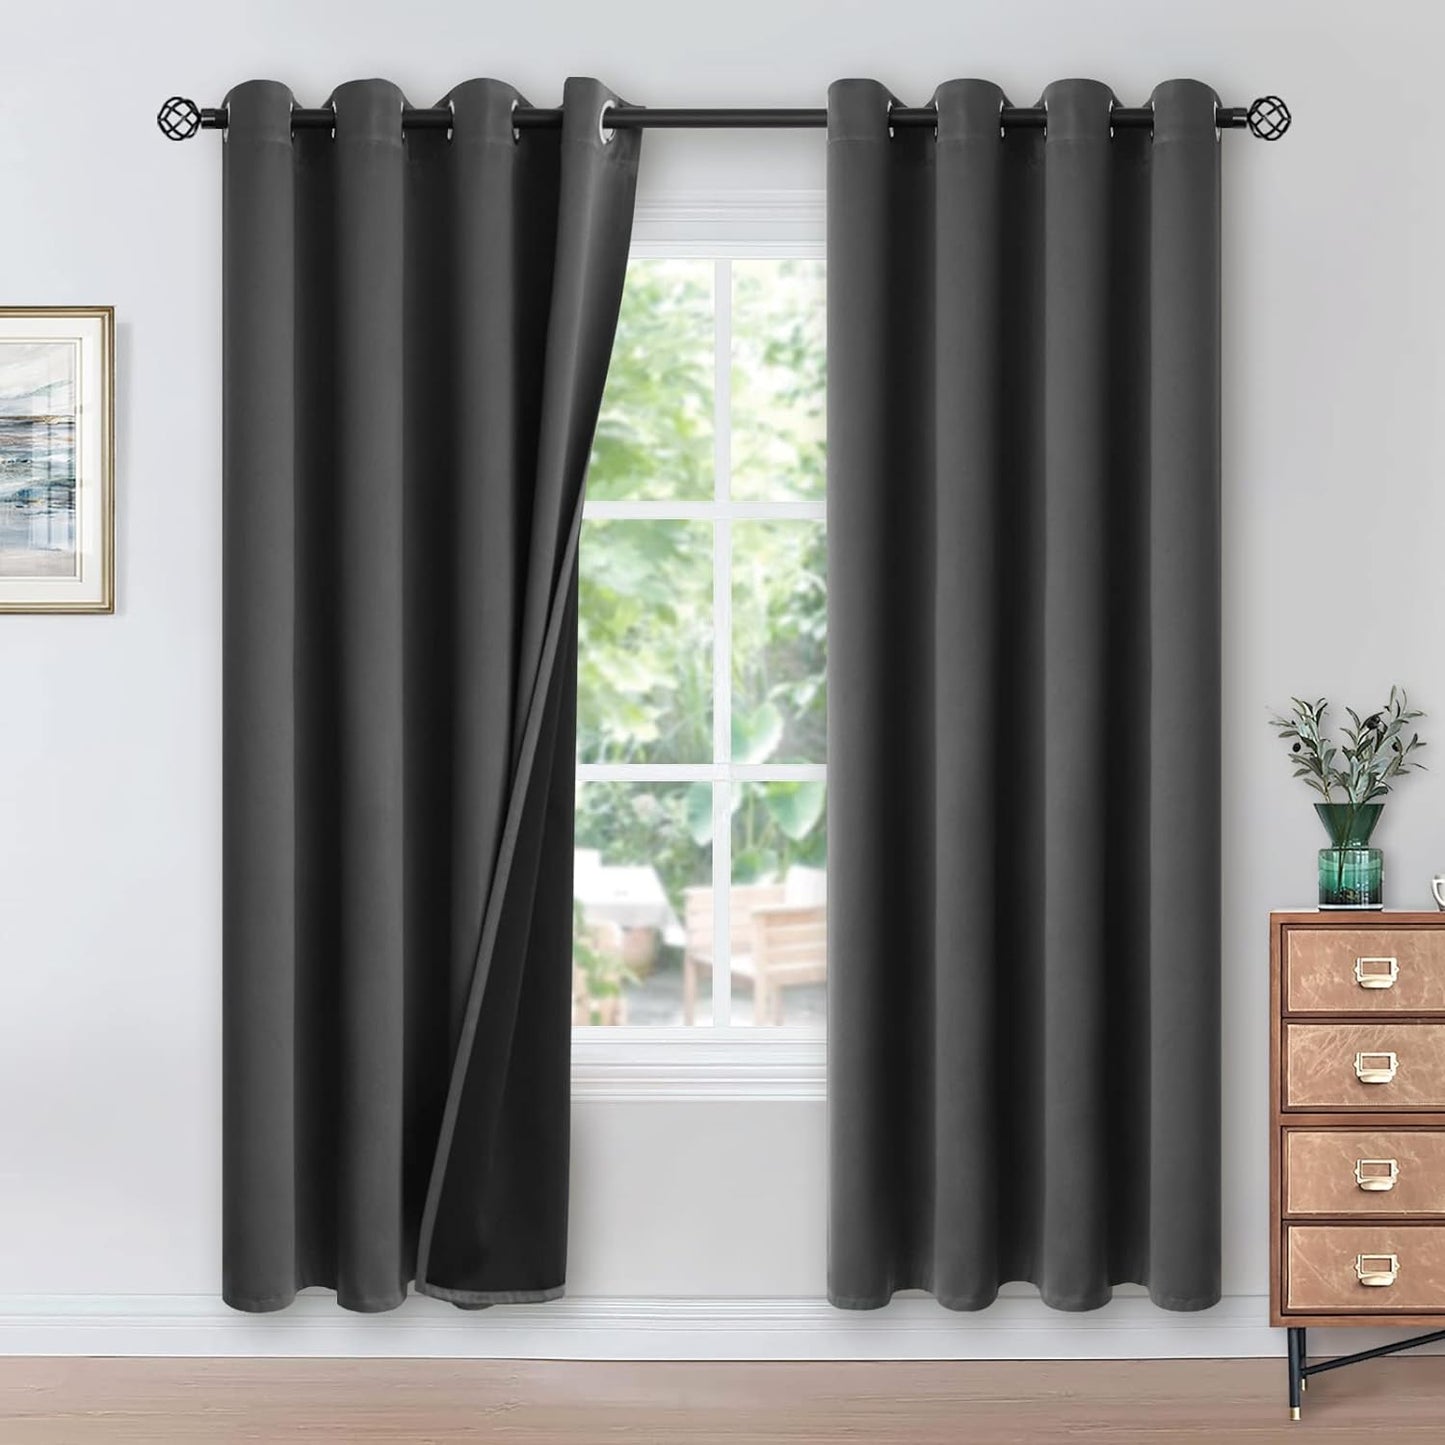 Youngstex Black 100% Blackout Curtains 63 Inches for Bedroom Thermal Insulated Total Room Darkening Curtains for Living Room Window with Black Back Grommet, 2 Panels, 42 X 63 Inch  YoungsTex Dark Grey 52W X 84L 